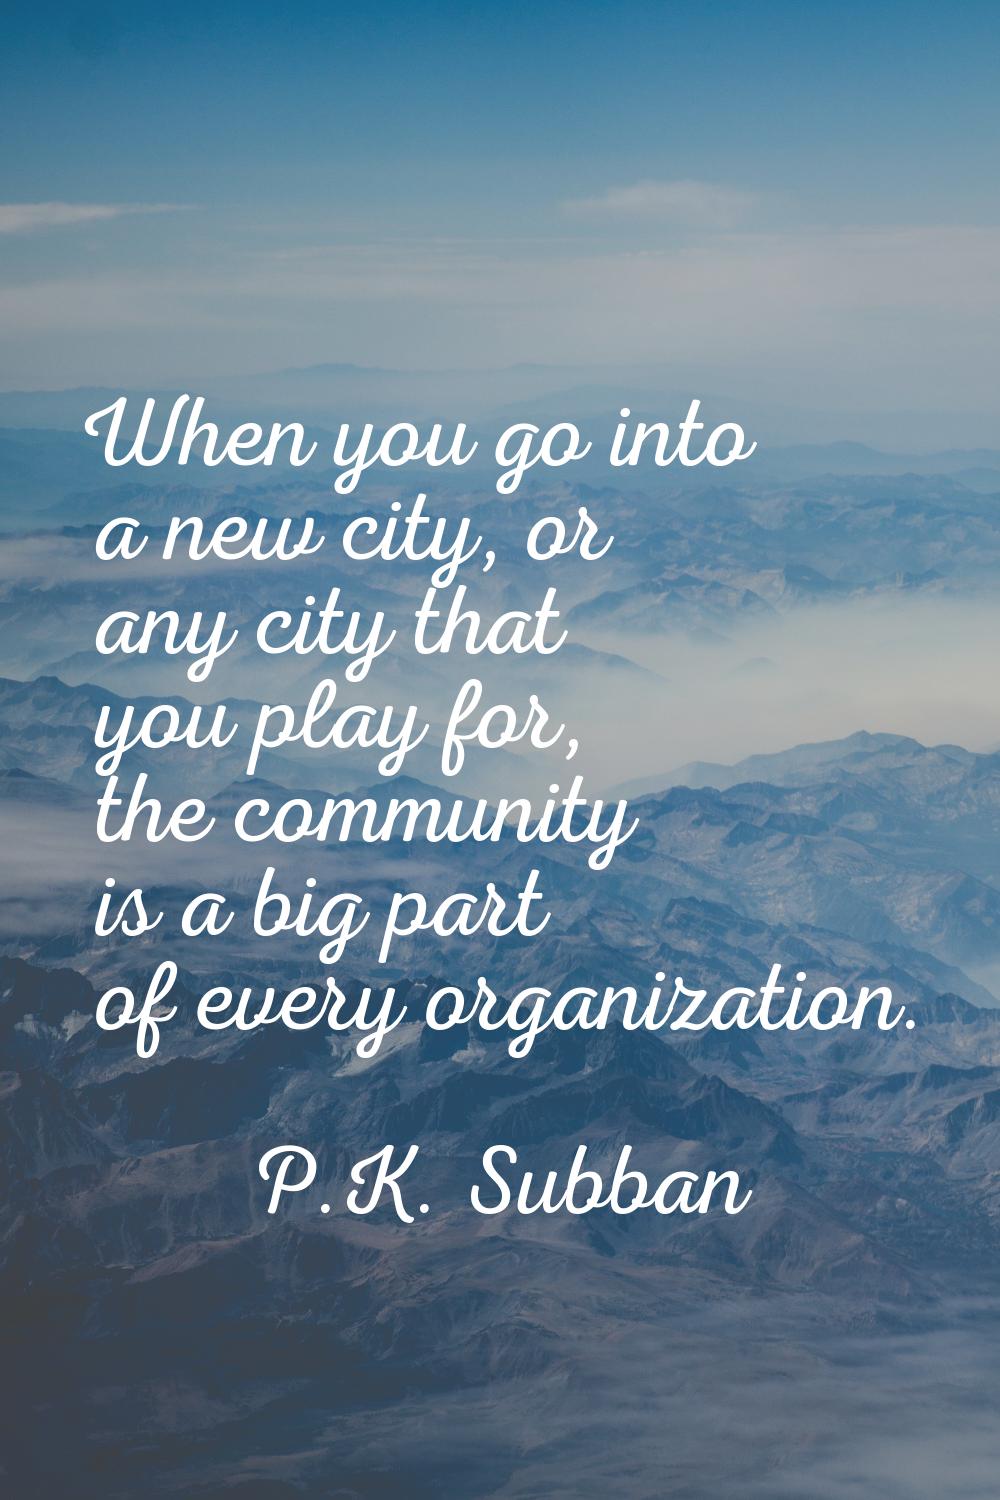 When you go into a new city, or any city that you play for, the community is a big part of every or